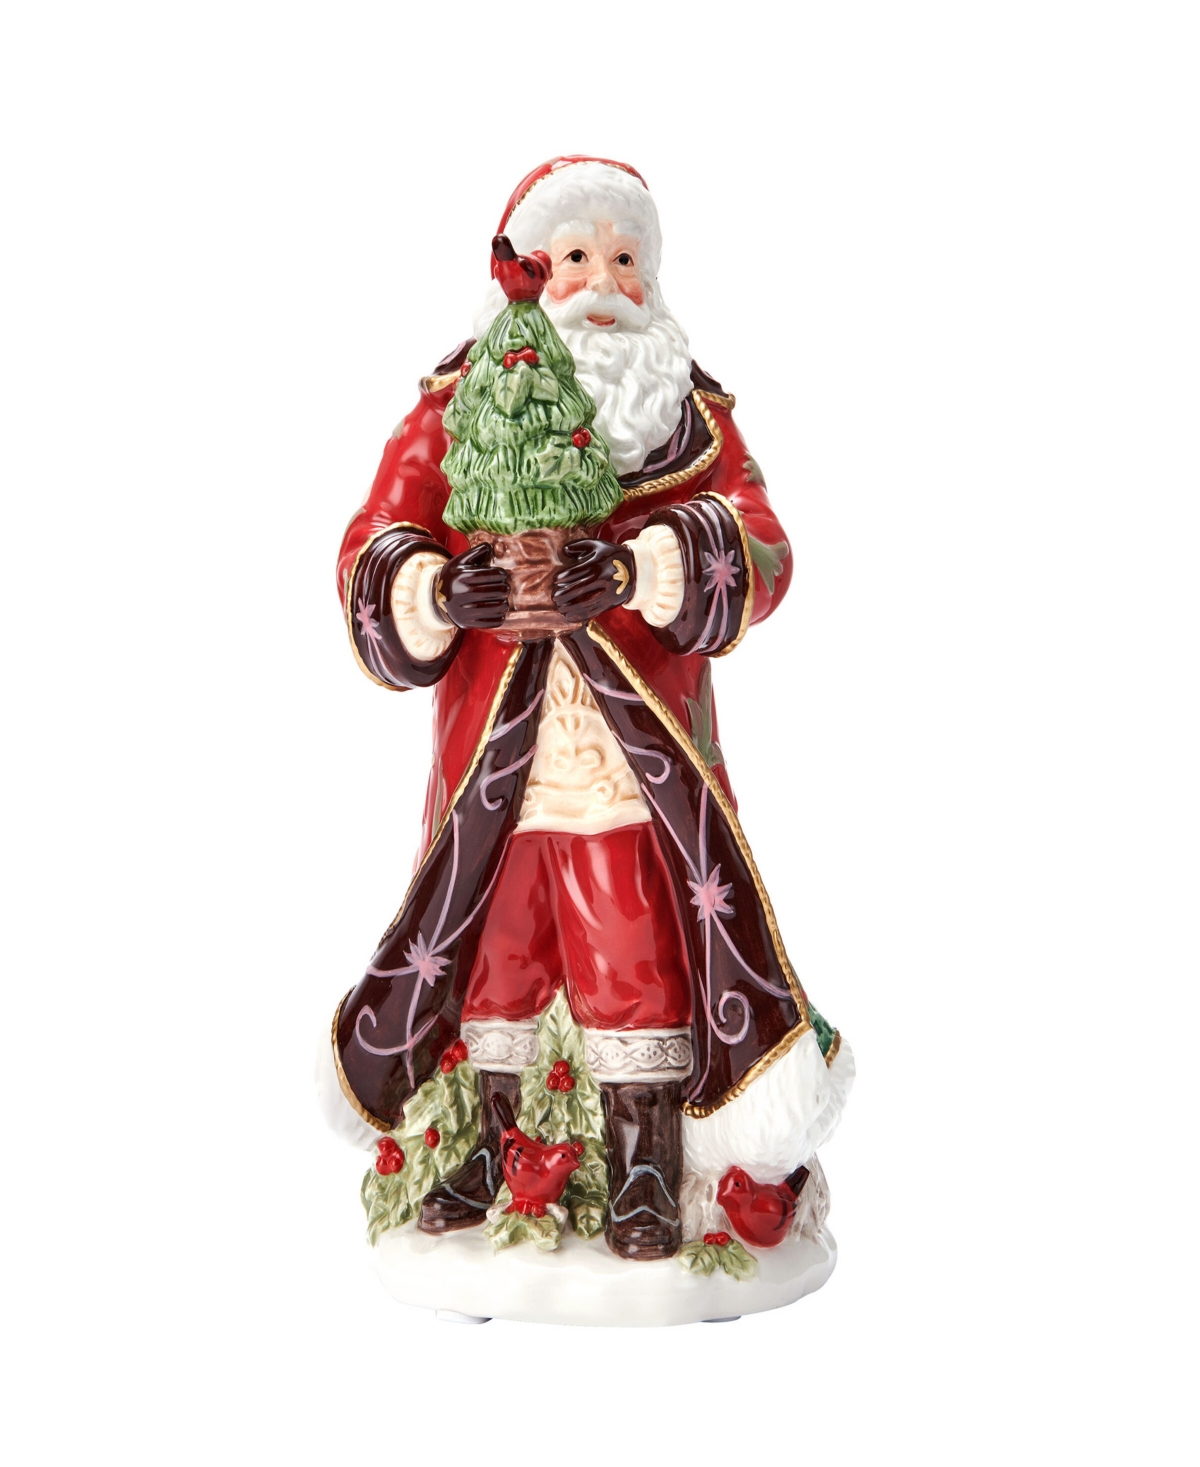 Chalet Holiday Musical Santa, 10.75-in - Red